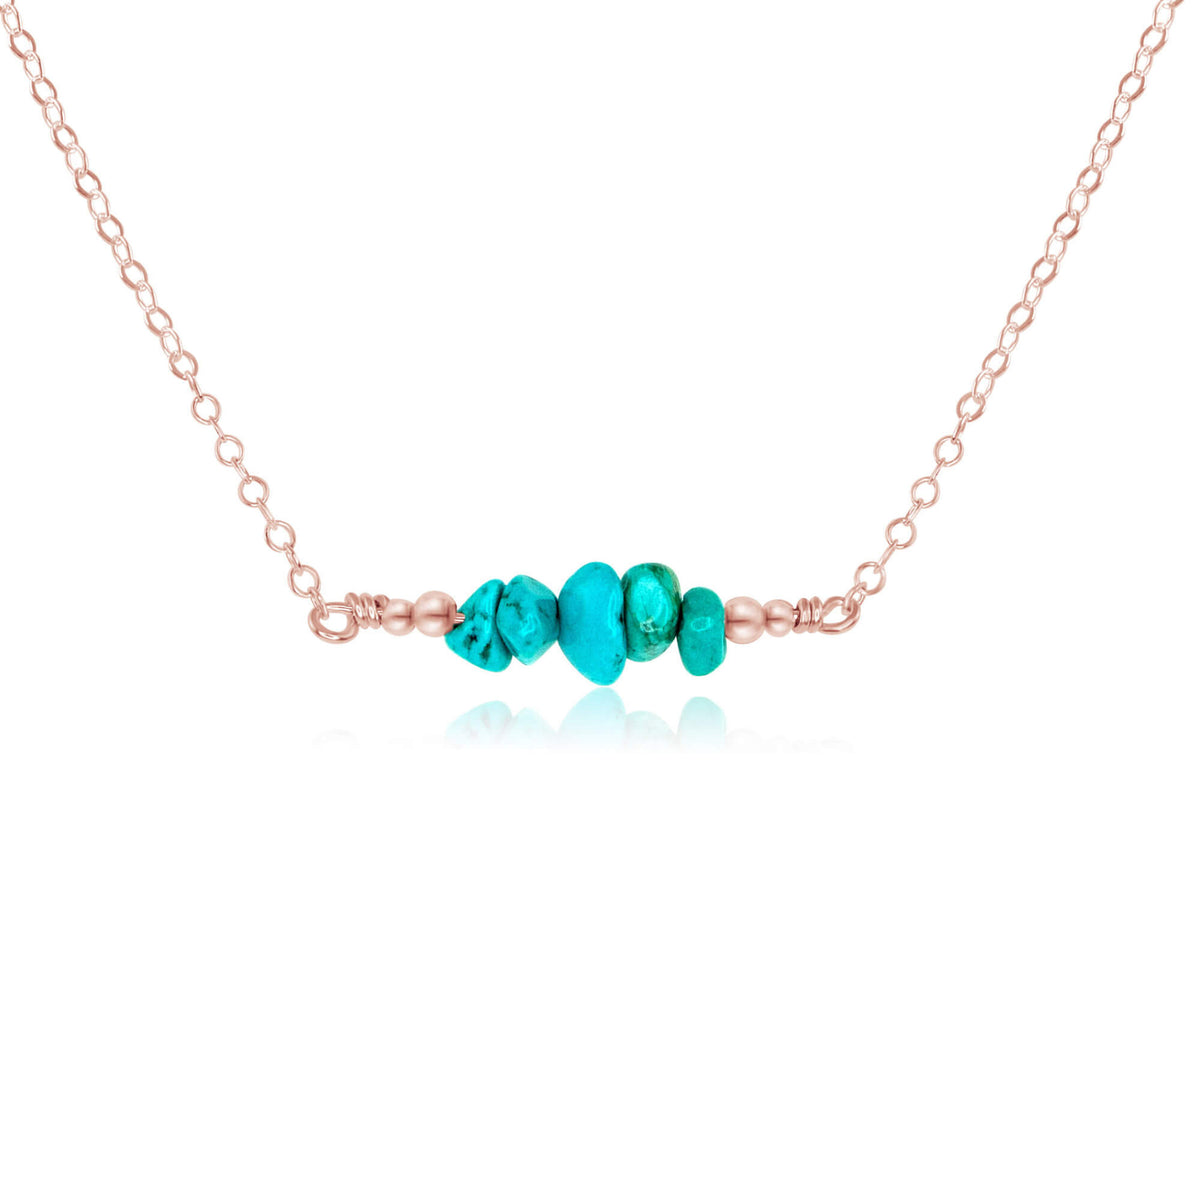 Chip Bead Bar Necklace - Turquoise - 14K Rose Gold Fill - Luna Tide Handmade Jewellery